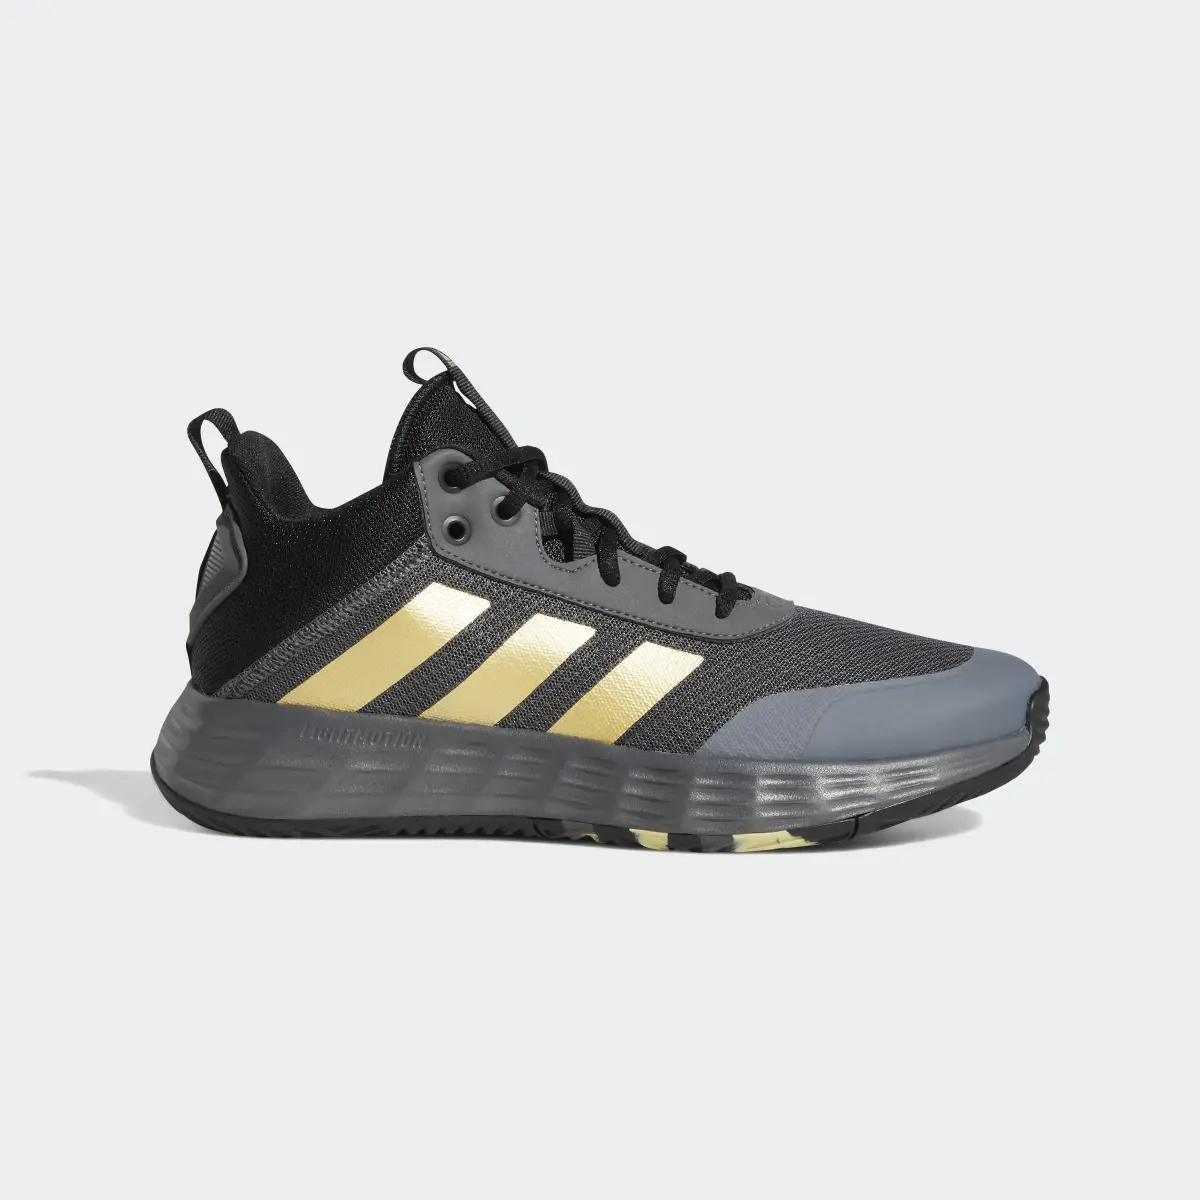 Adidas Ownthegame Shoes. 2